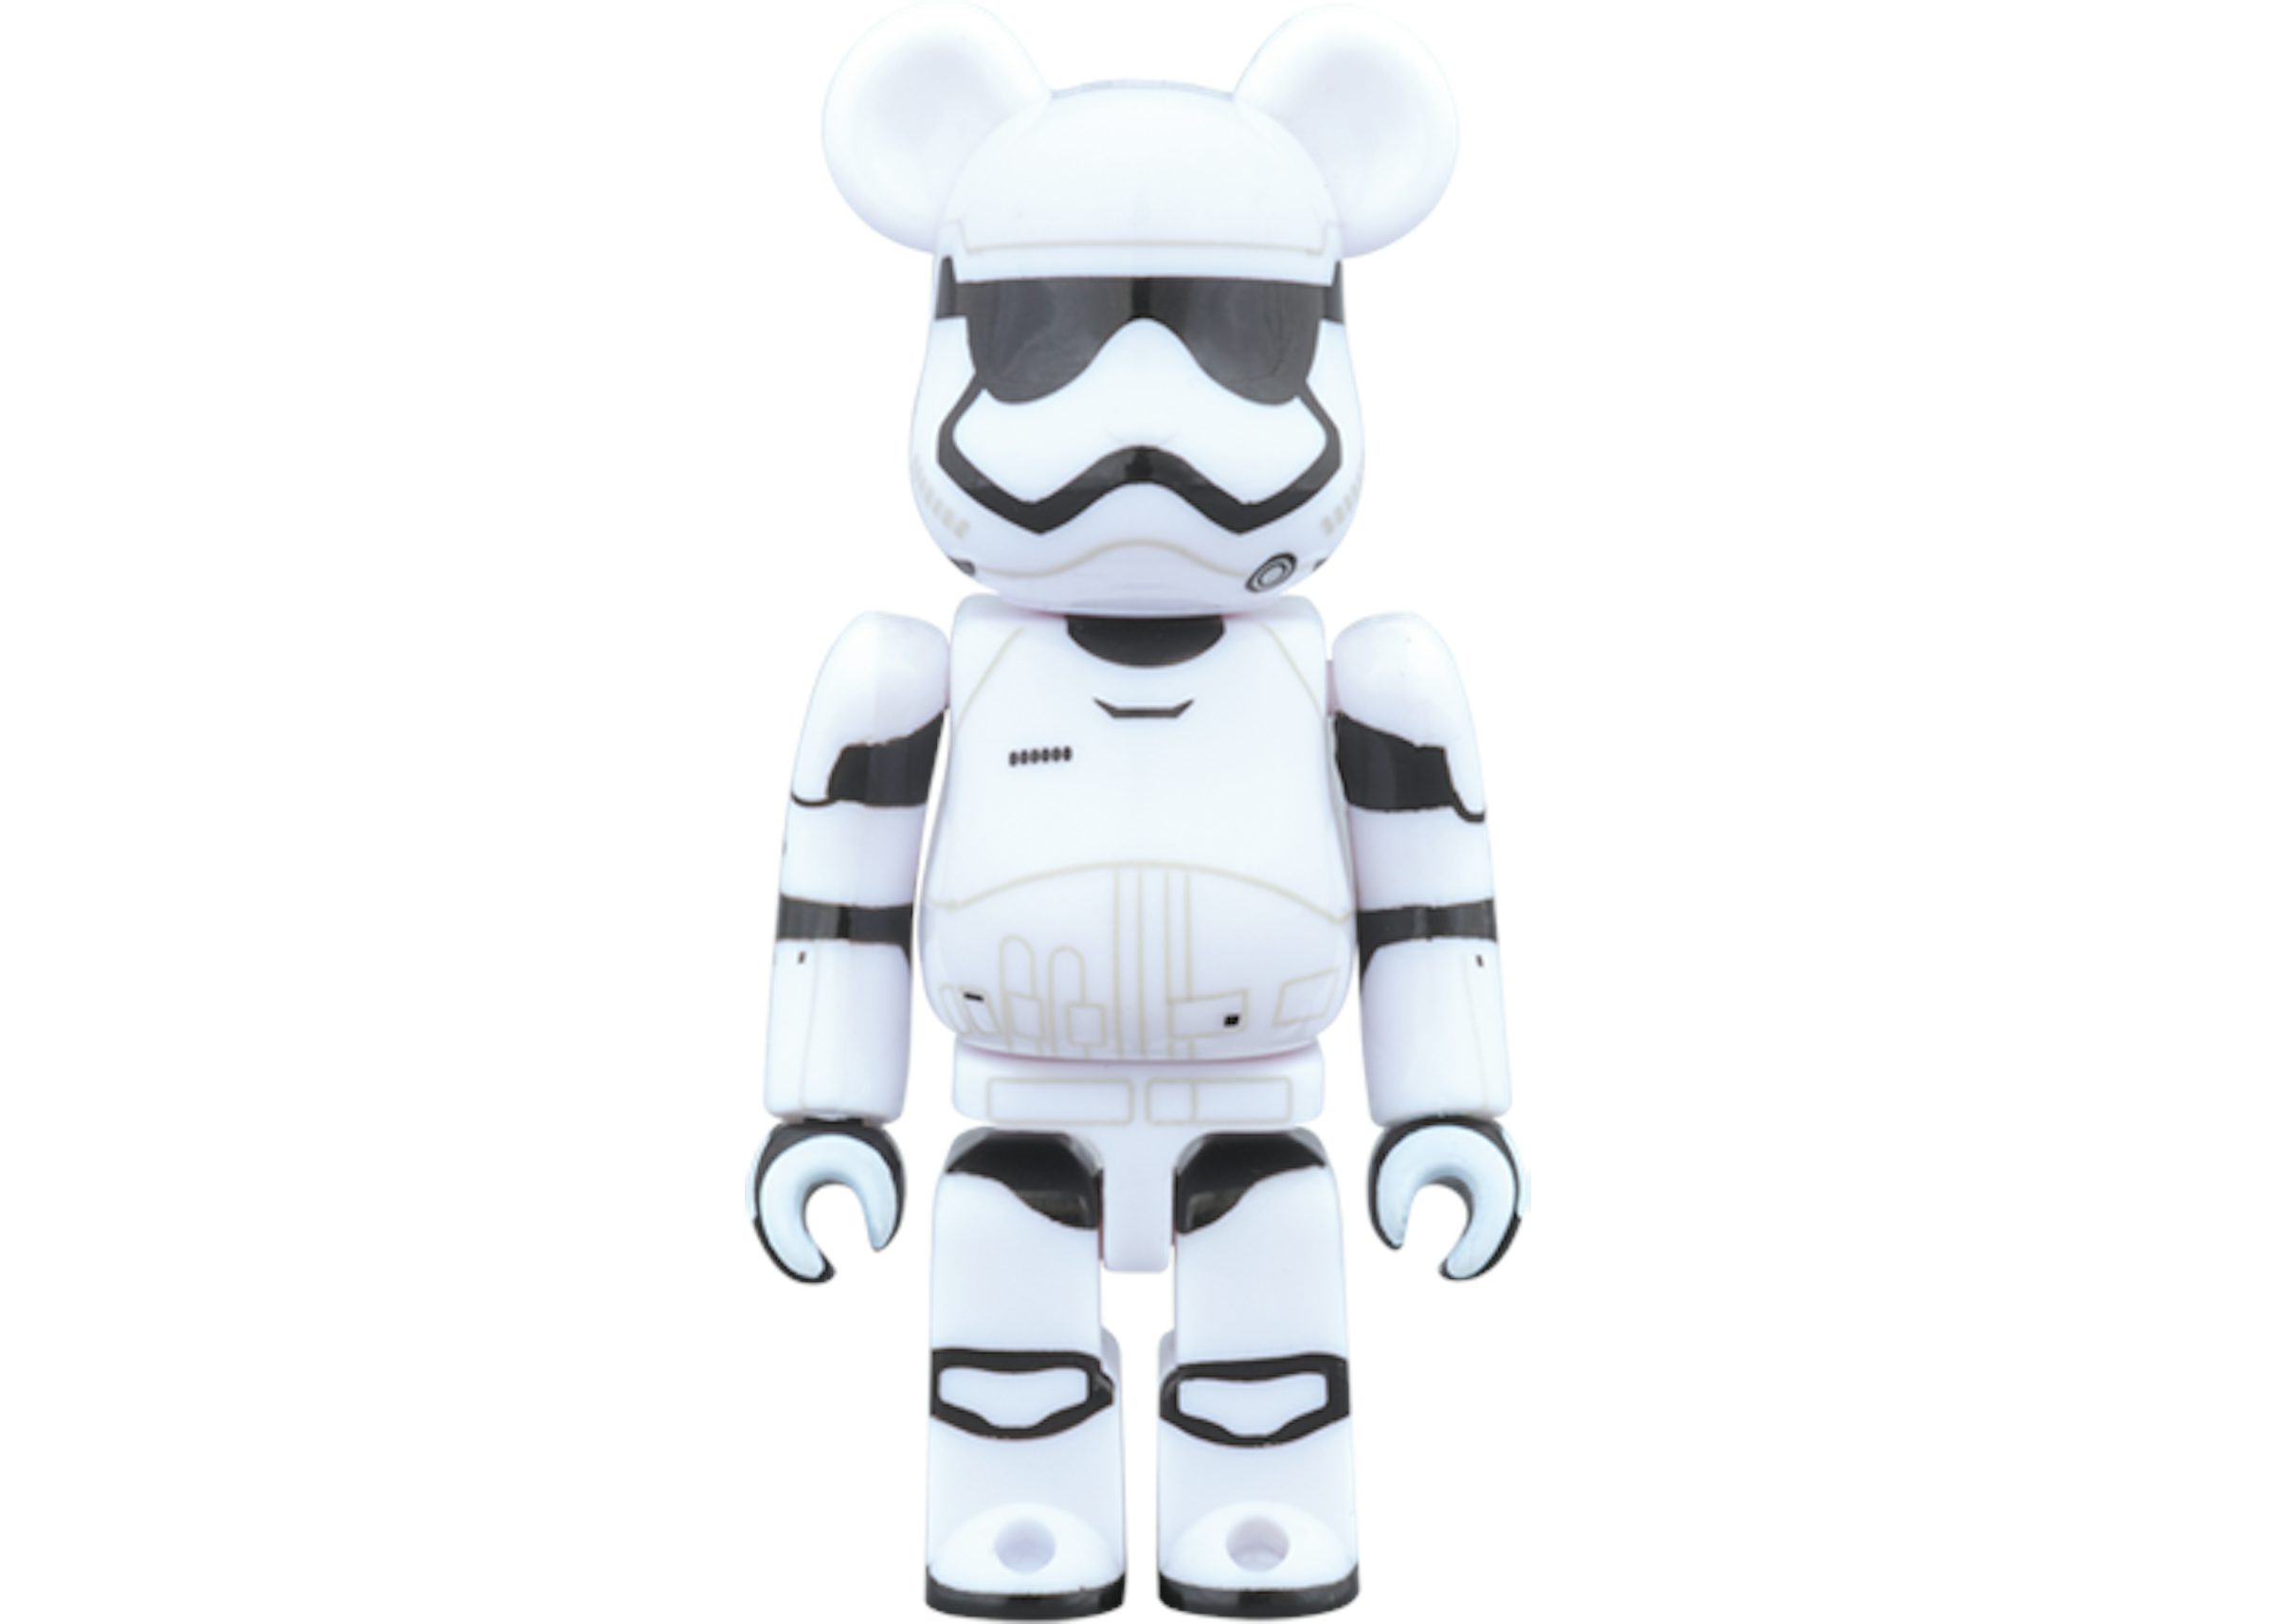 Be@rbrick First Order Stormtrooper 100%